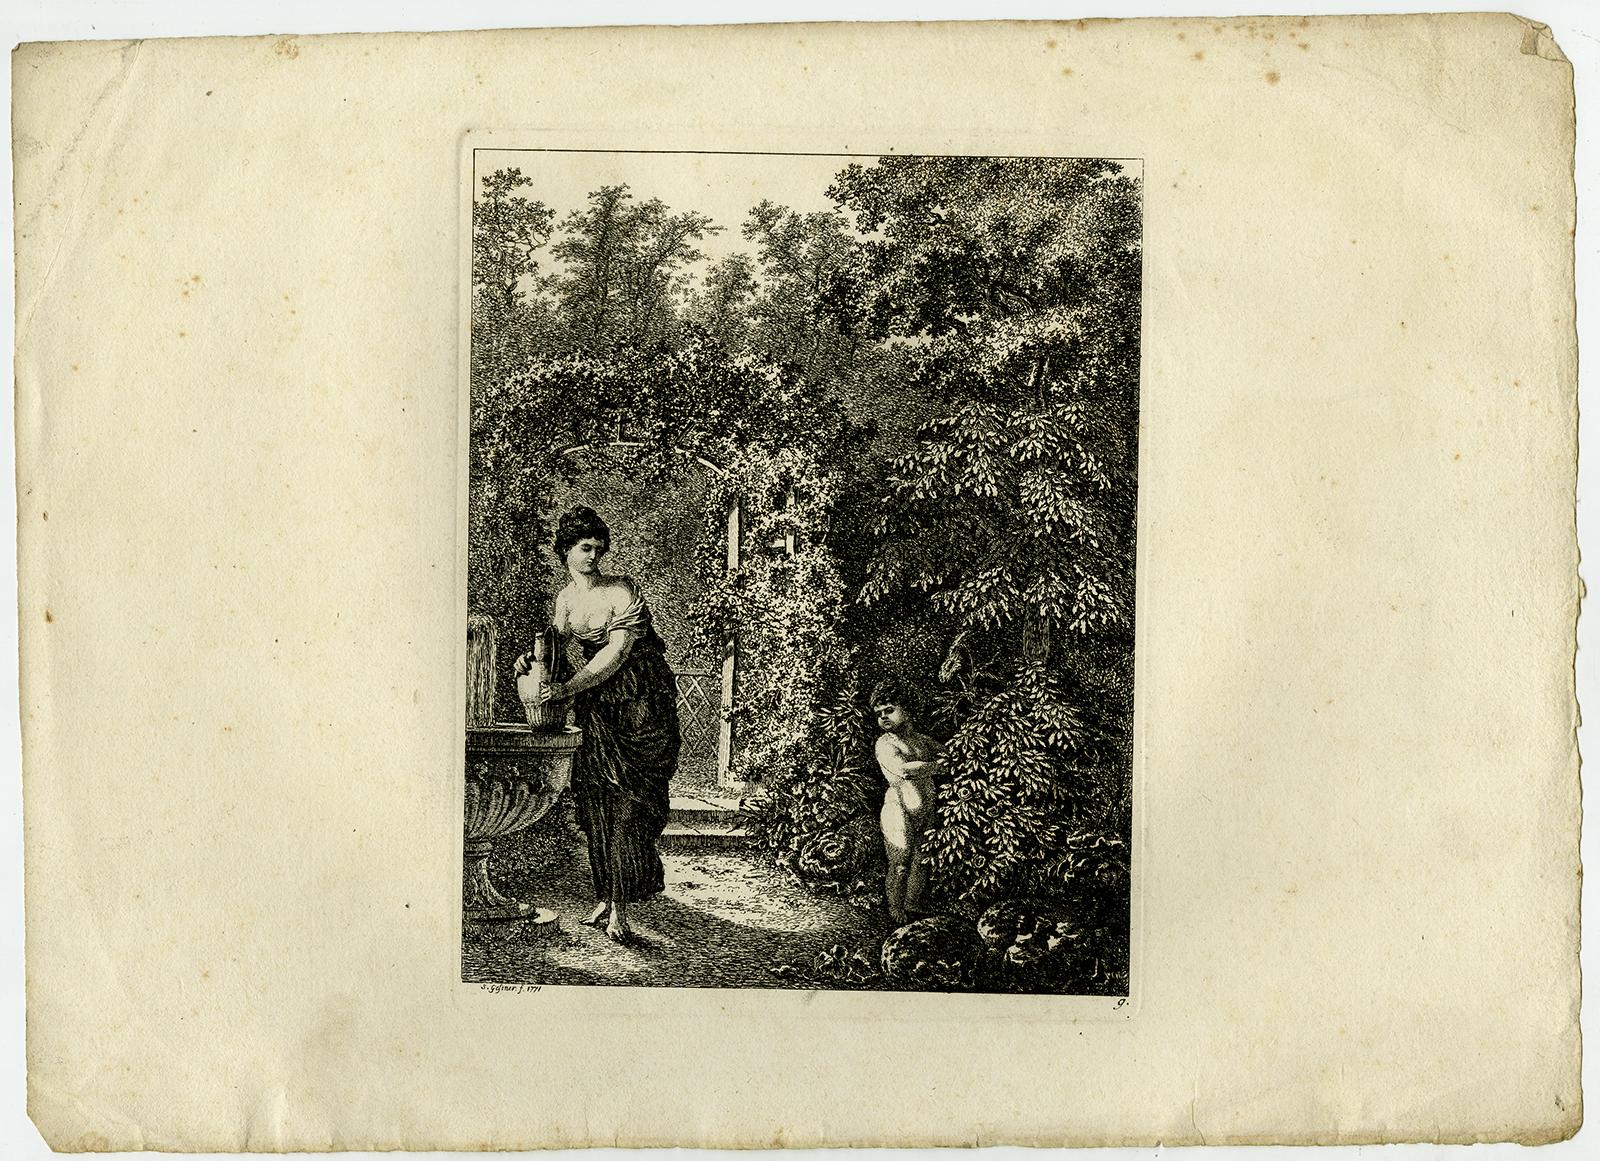 Subject:  Antique Master Print, untitled.  - A woman with pitcher near fountain and bow with a child in a garden.

Description:  From a set with landscapes in the 'antique' taste. . Ref: L/E 31.

Artists and Engravers:  Made by 'Salomon Gessner'